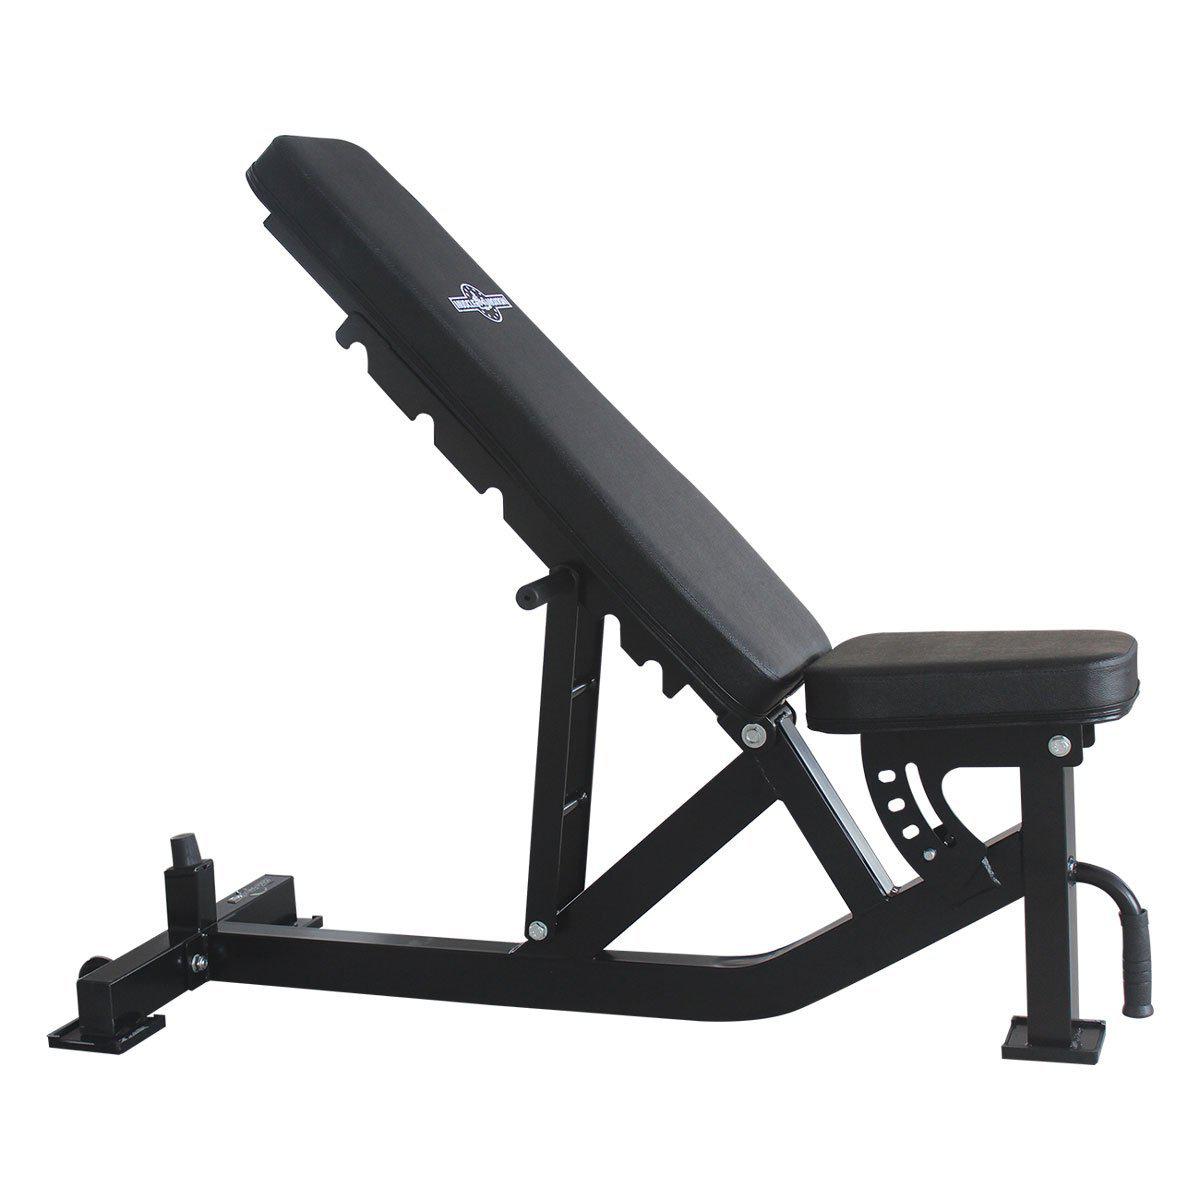 Muscle Motion PR1012 Package- Power Rack inc high low pulley+Bench+Bar+100kg Bumper weight Plates